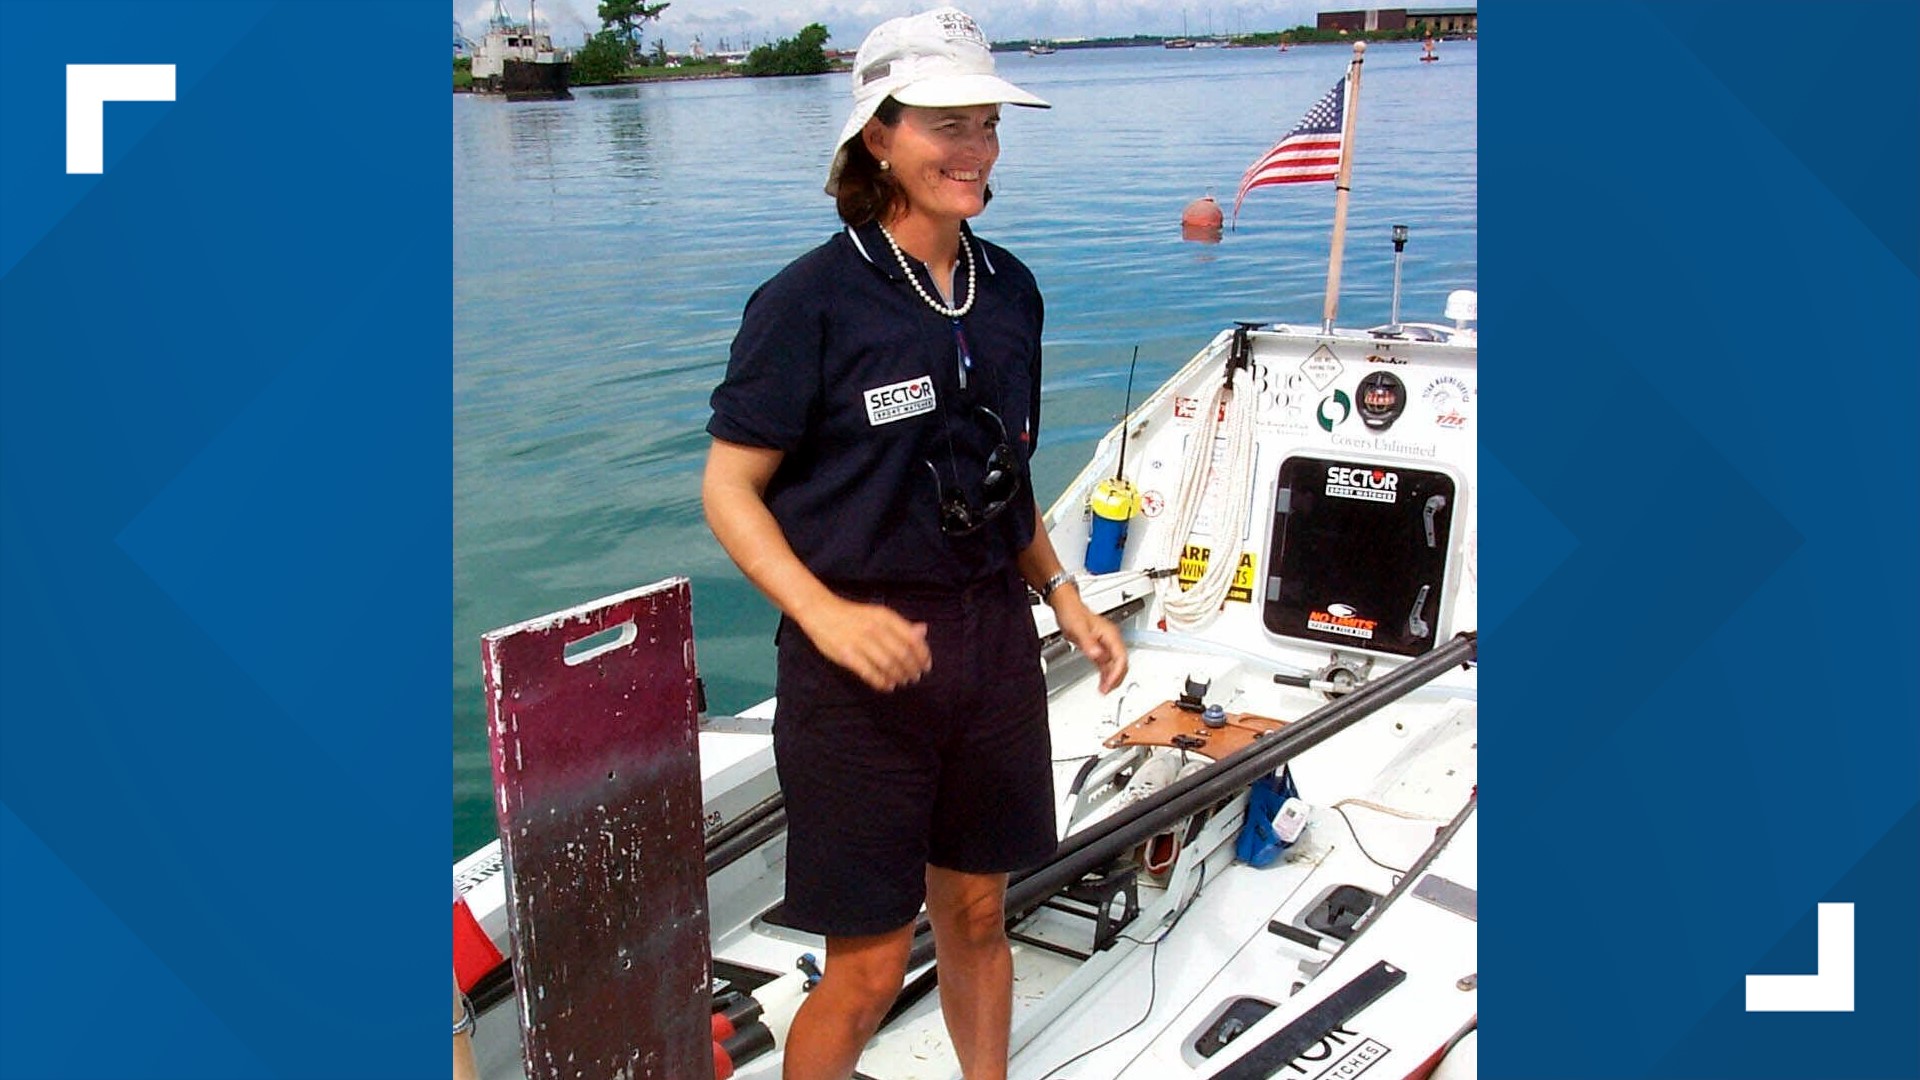 Tori Murden McClure was the first woman, and American, to ever solo row across the Atlantic Ocean. She currently serves as Spalding University's president.